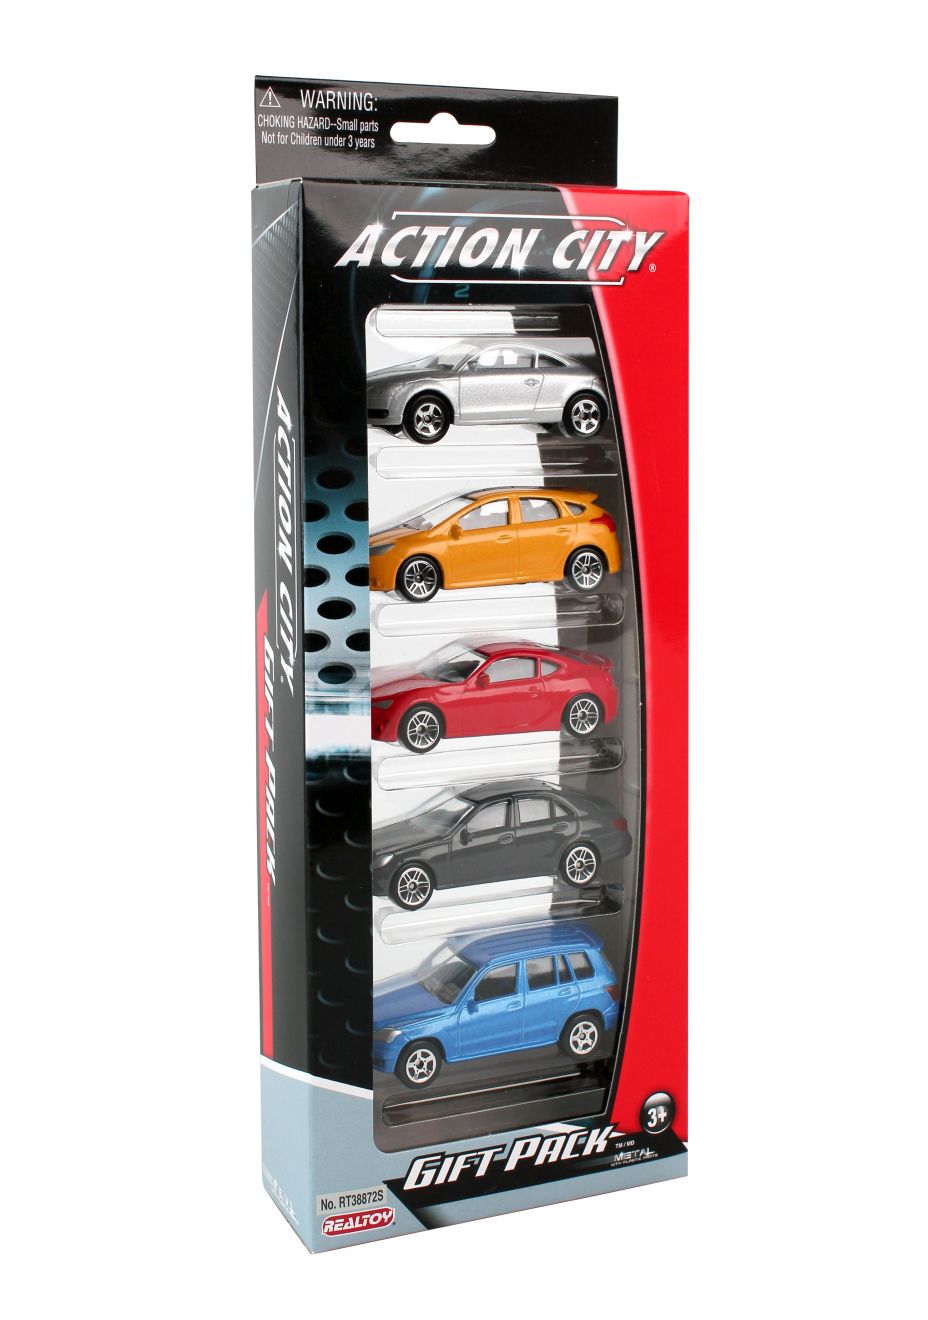 Street Car Vehicle Gift Pack (5 Piece)